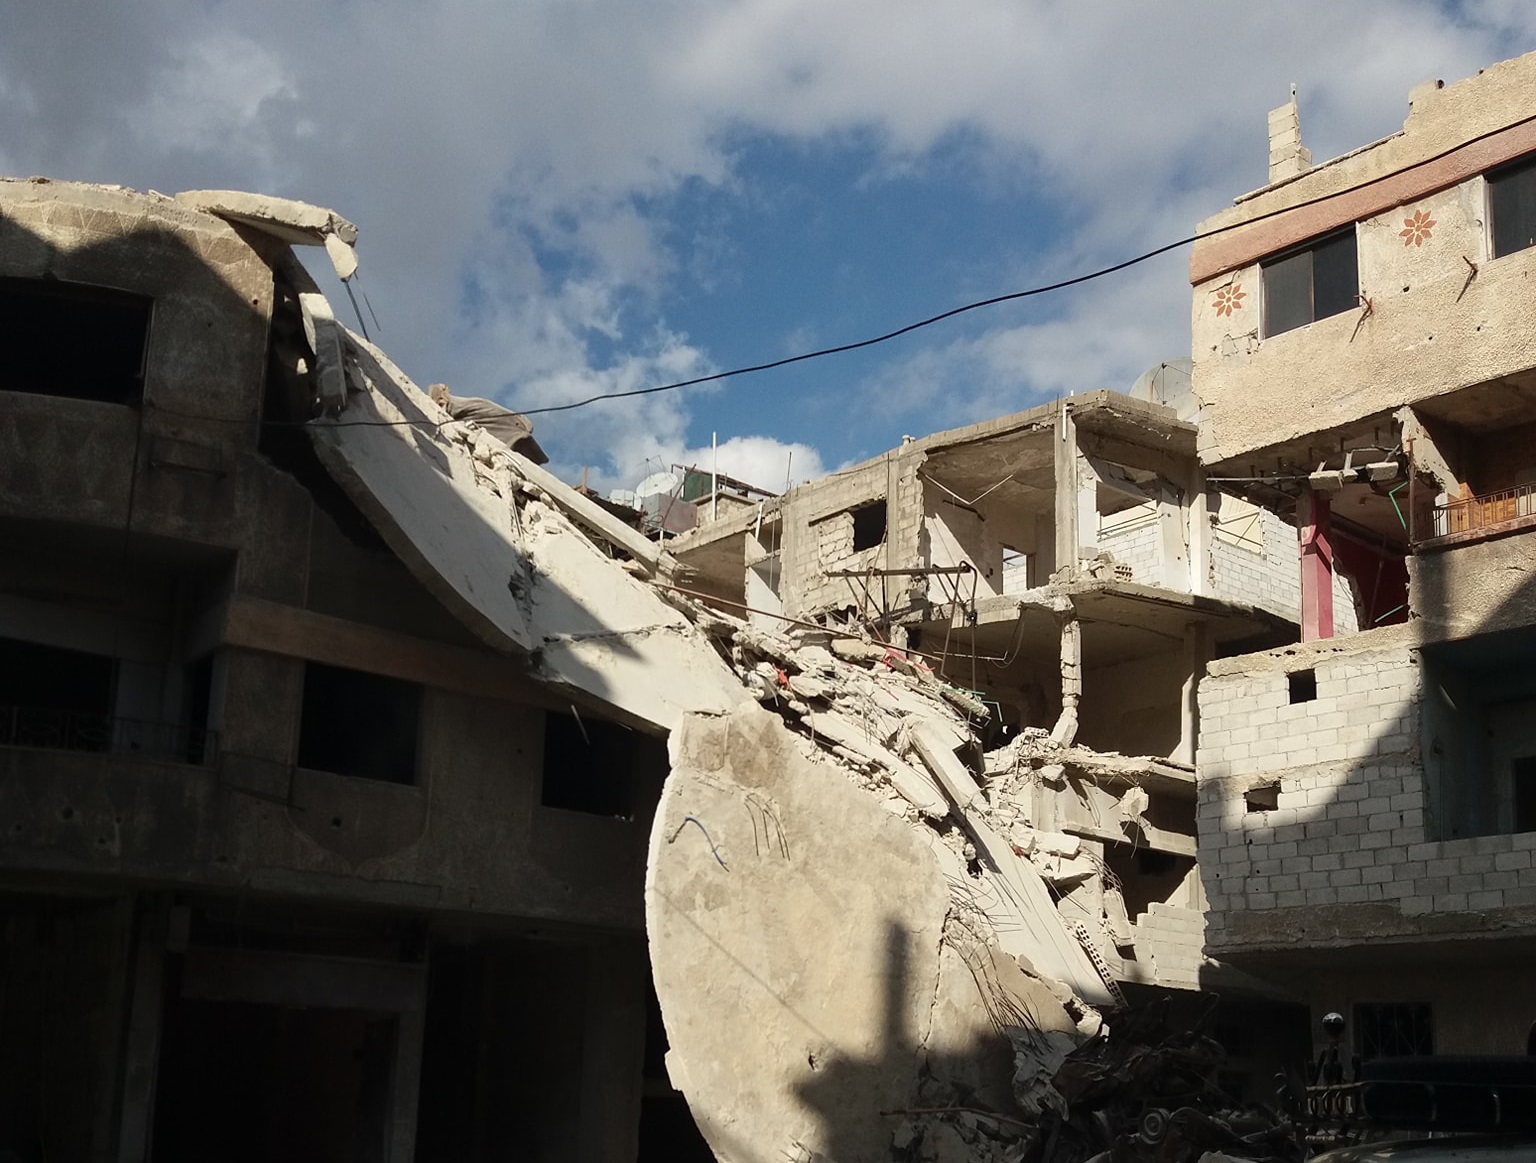 Civilians Call for Identification of Buildings at Risk of Collapse in Yarmouk Refugee Camp